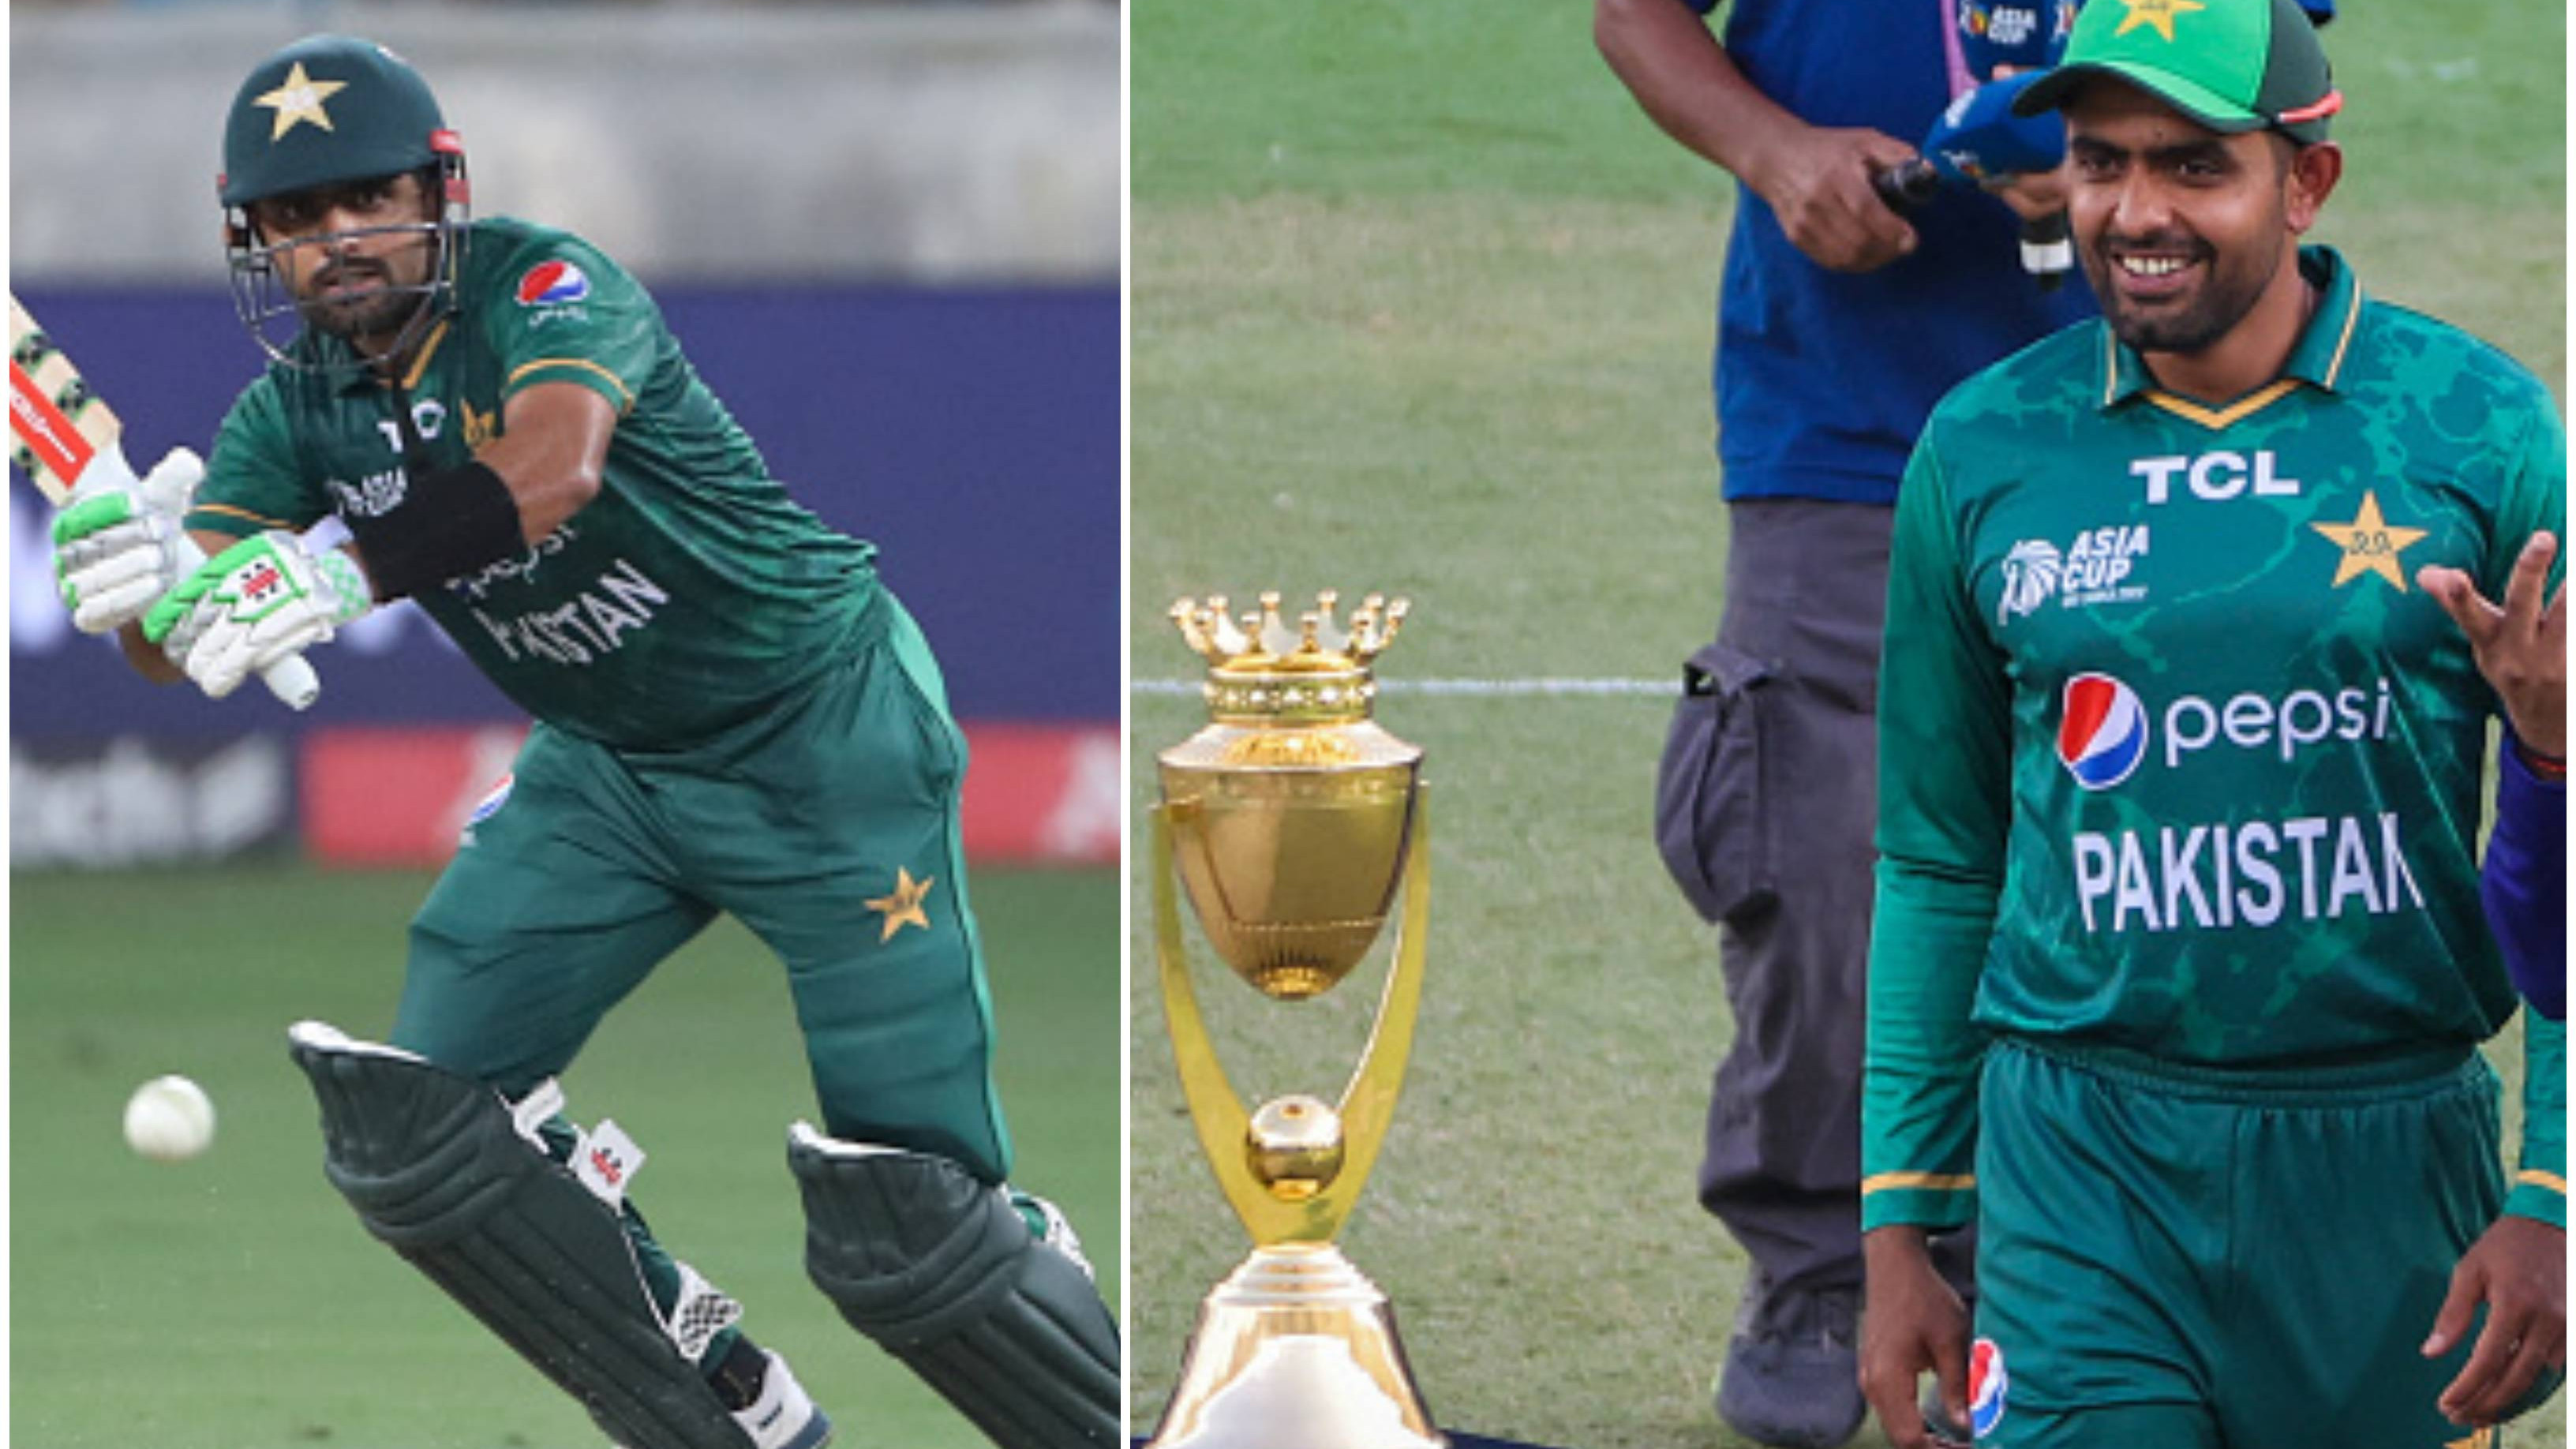 Asia Cup 2022: “Our goal is to perform well and win the tournament,” says Babar Azam ahead of the final